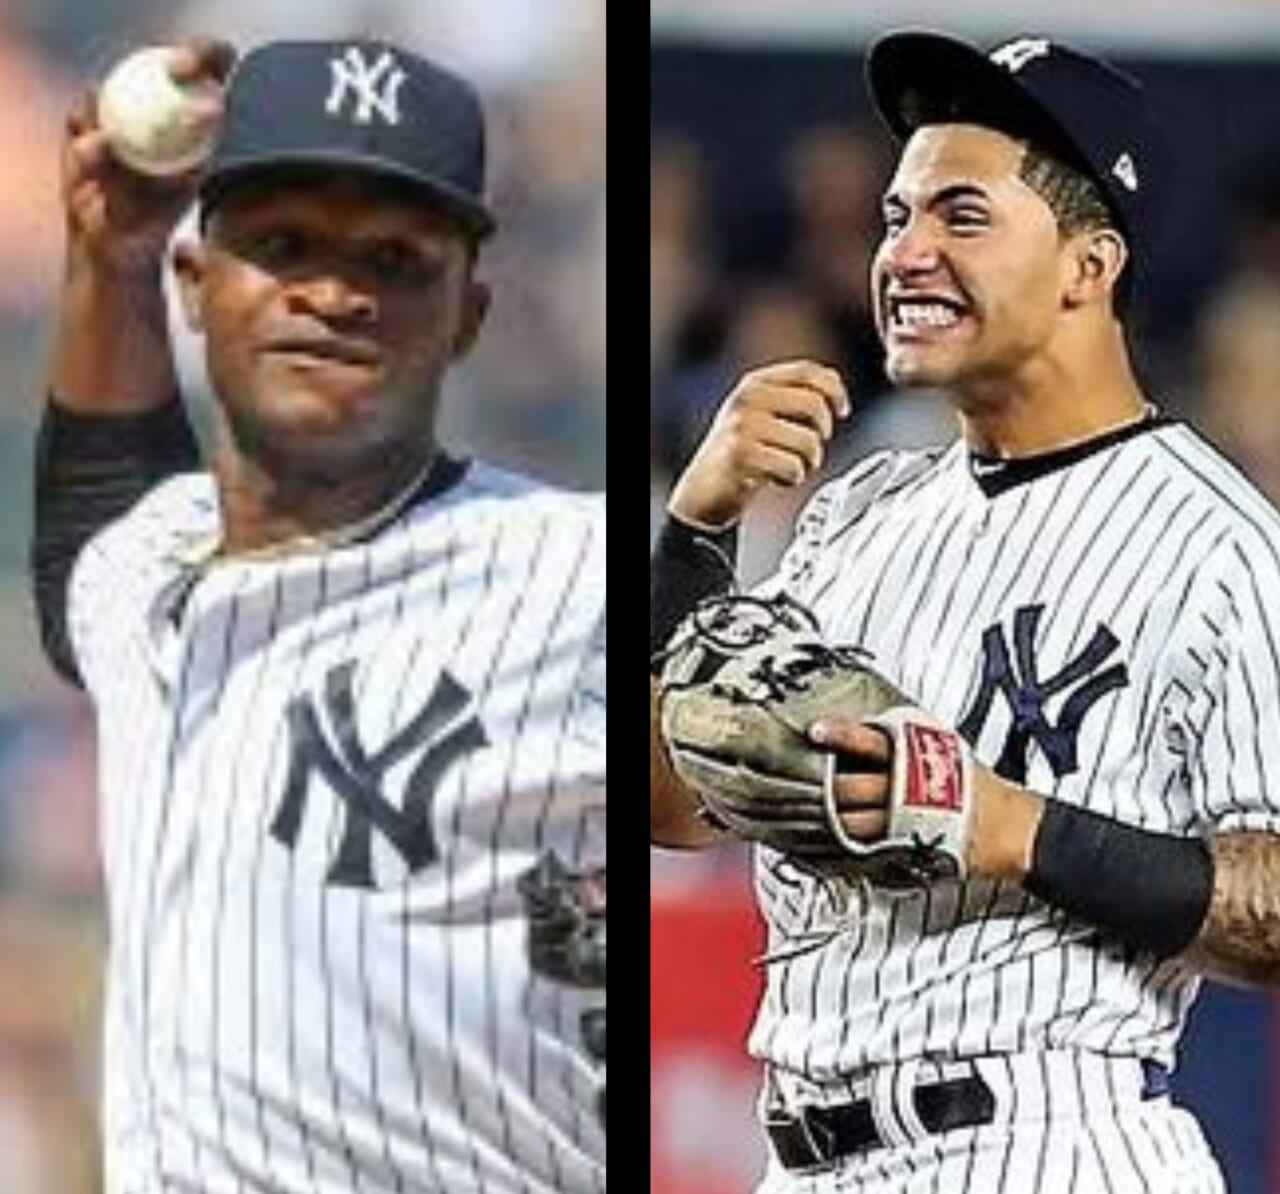 New York Yankees: 3 major takeaways from Yankees’ 8th series win in a row